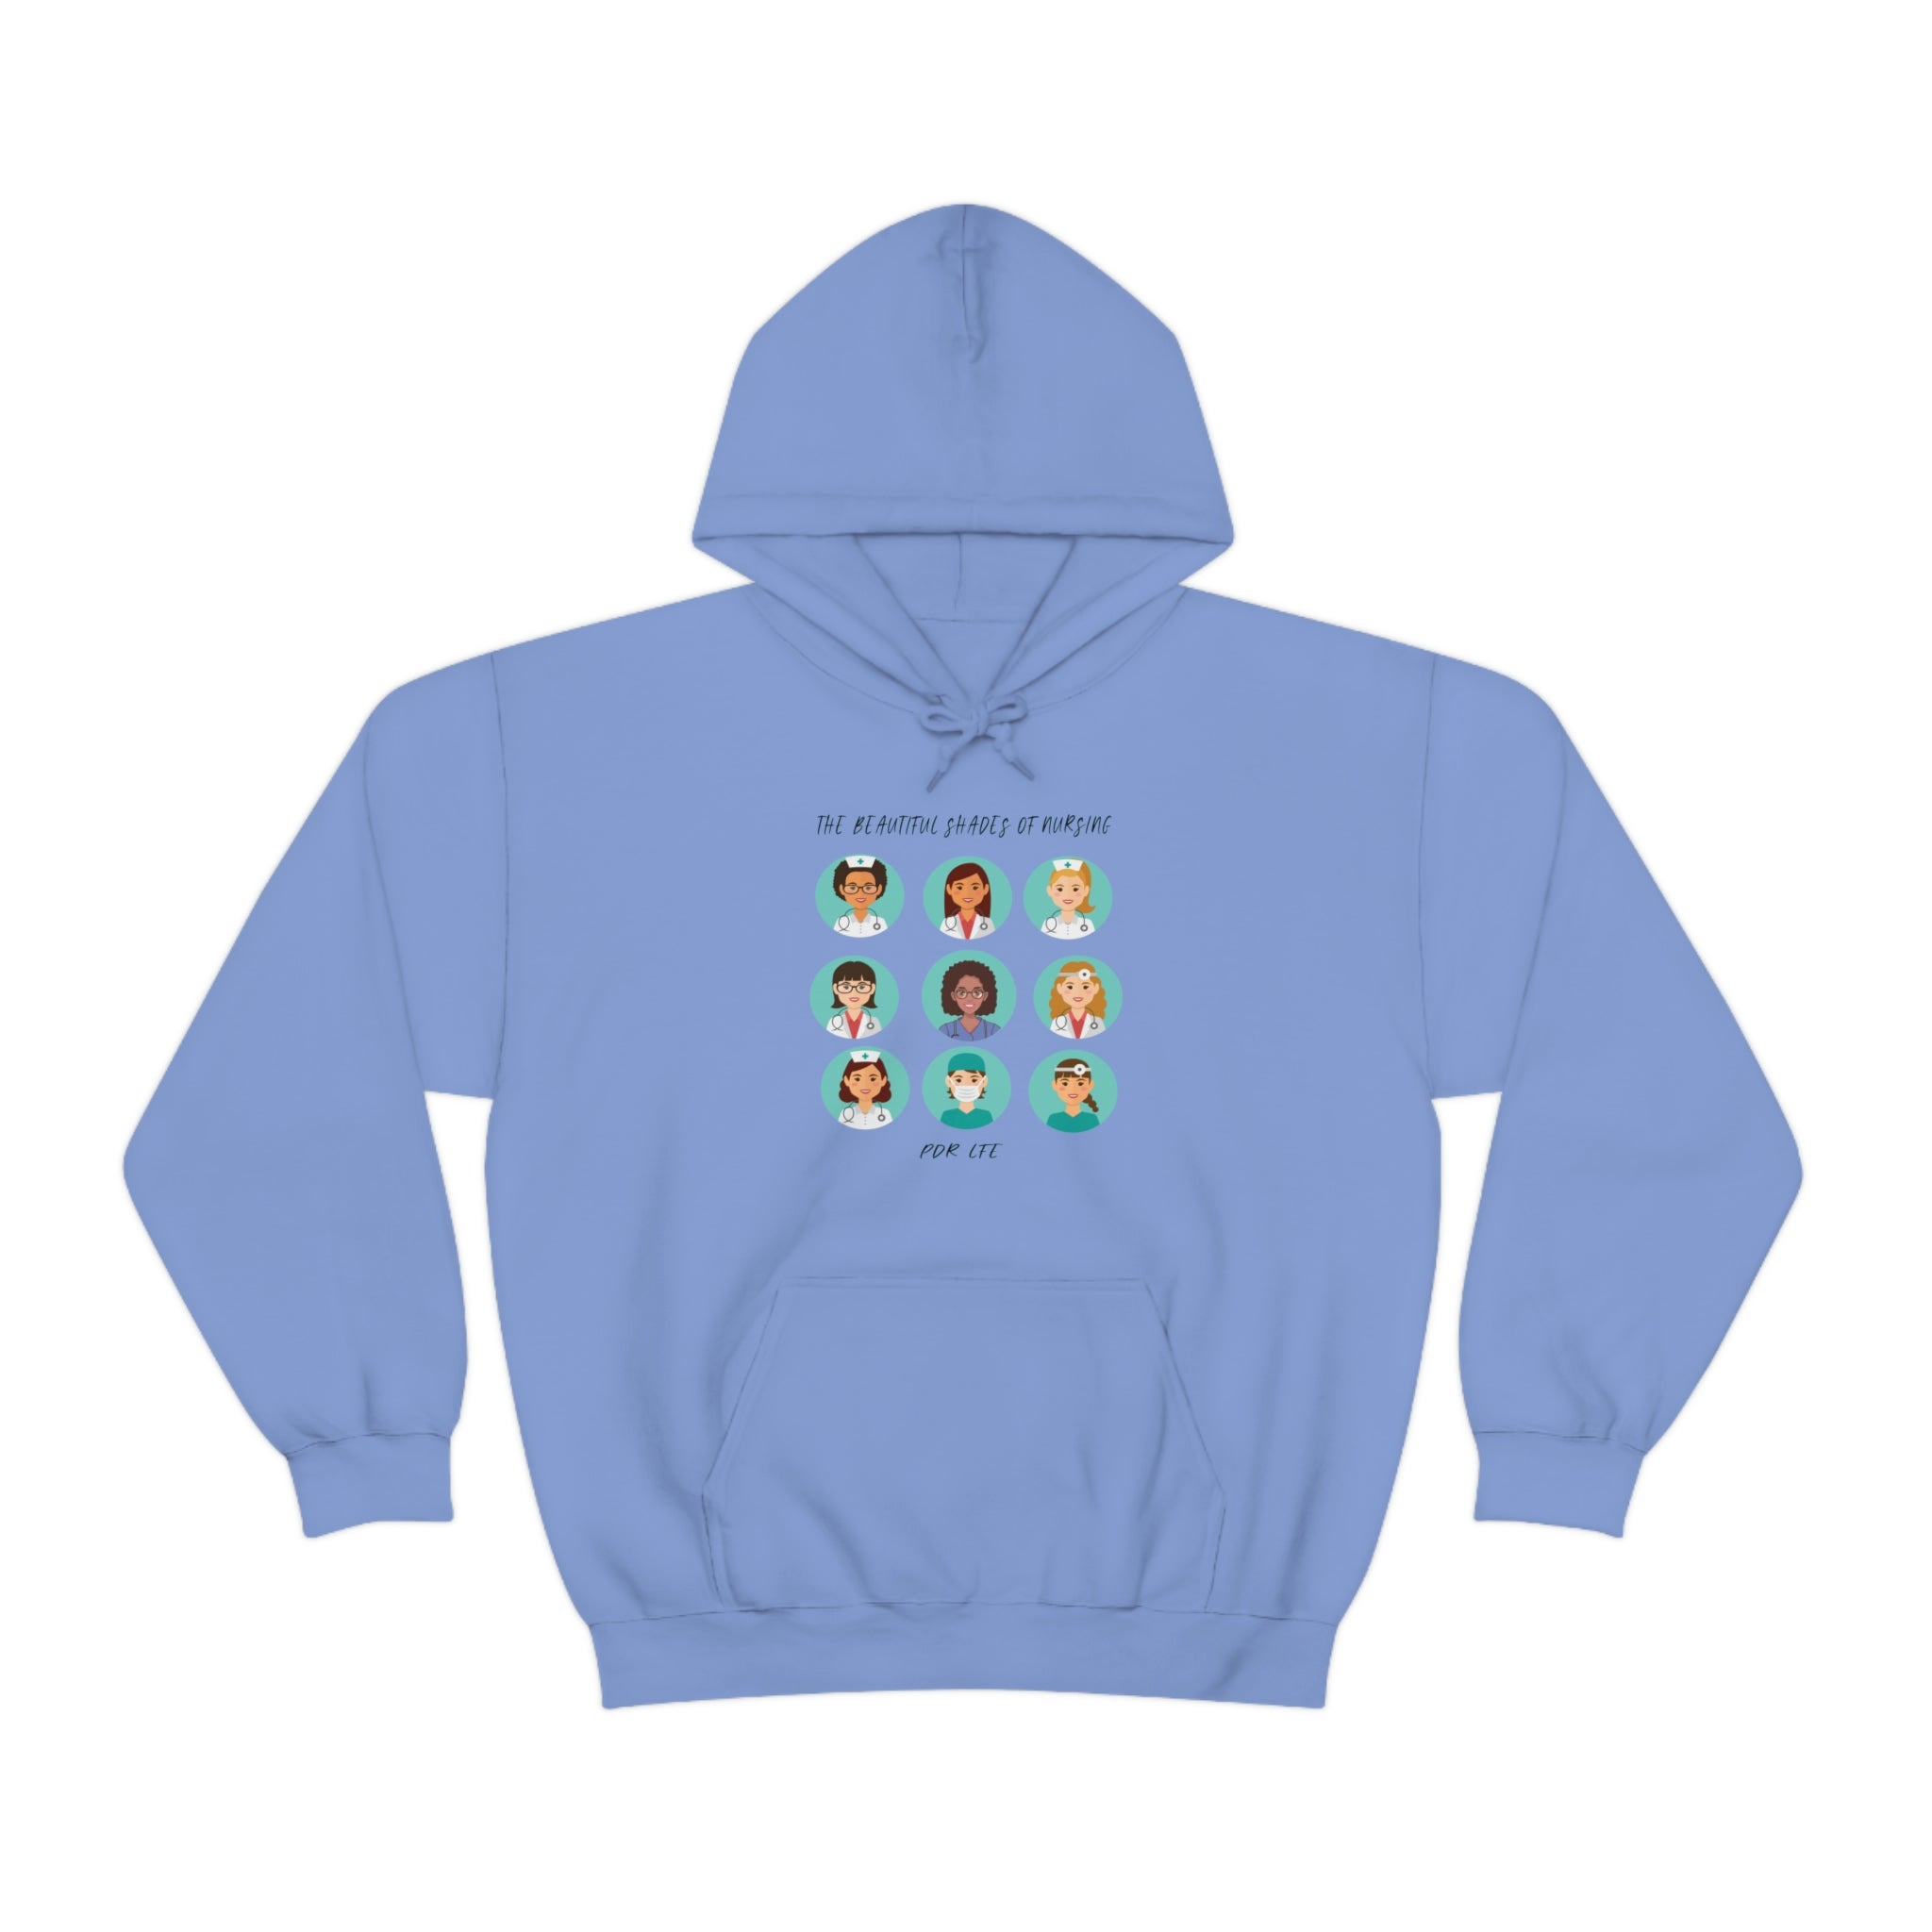 This unisex heavy blend hooded sweatshirt is relaxation itself. Made with a thick blend of cotton and polyester, it feels plush, soft and warm, a perfect choice for any cold day. In the front, the spacious kangaroo pocket adds daily practicality while the hood's drawstring is the same color as the base sweater for extra style points